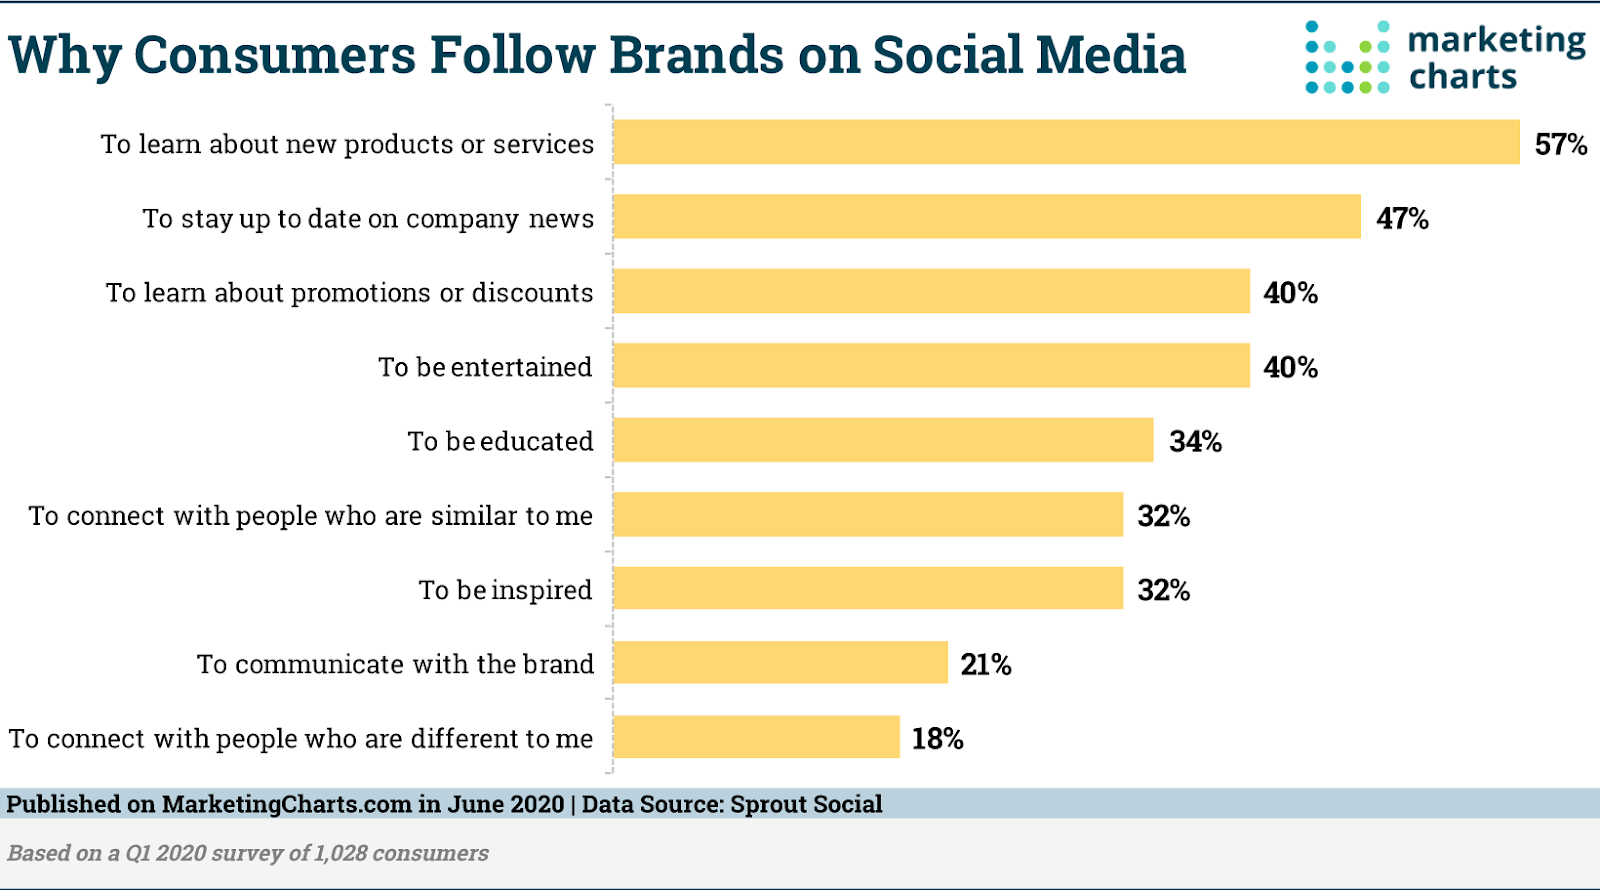 Consumer follow brands on social media research by Marketing charts